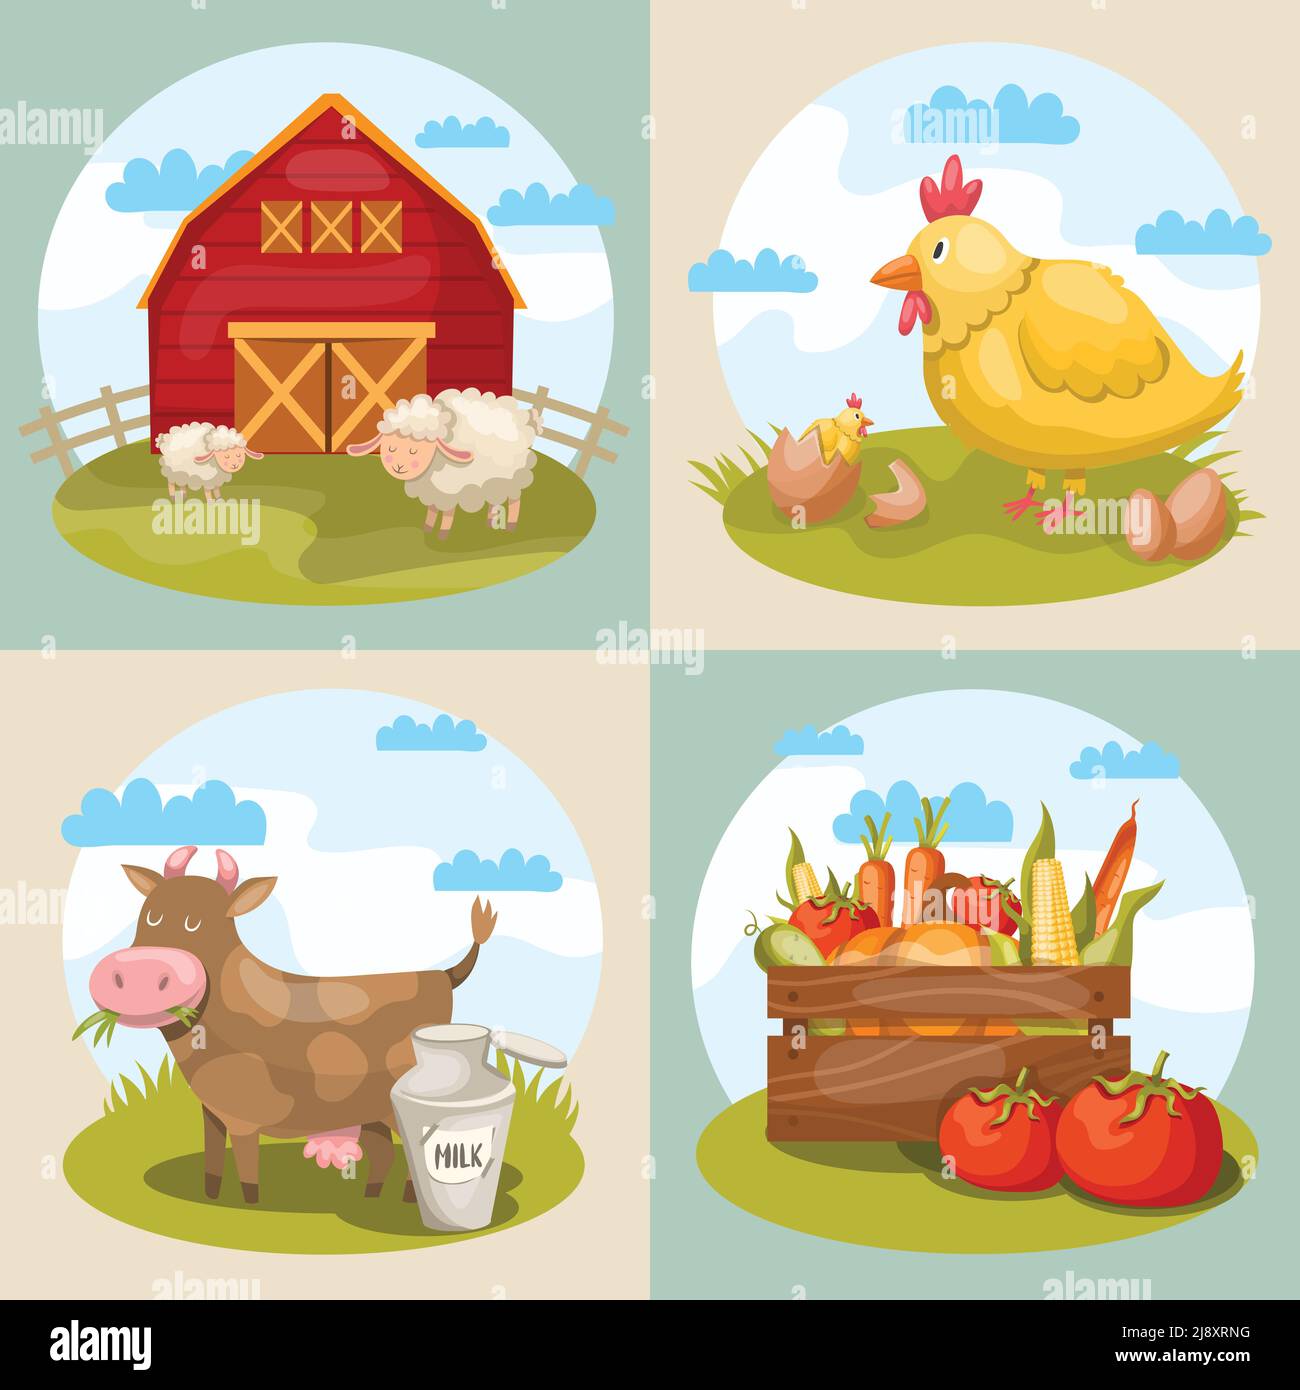 Four square compositions set with various cartoon farm symbols warehouse animals cow chicken lambs and vegetables vector illustration Stock Vector